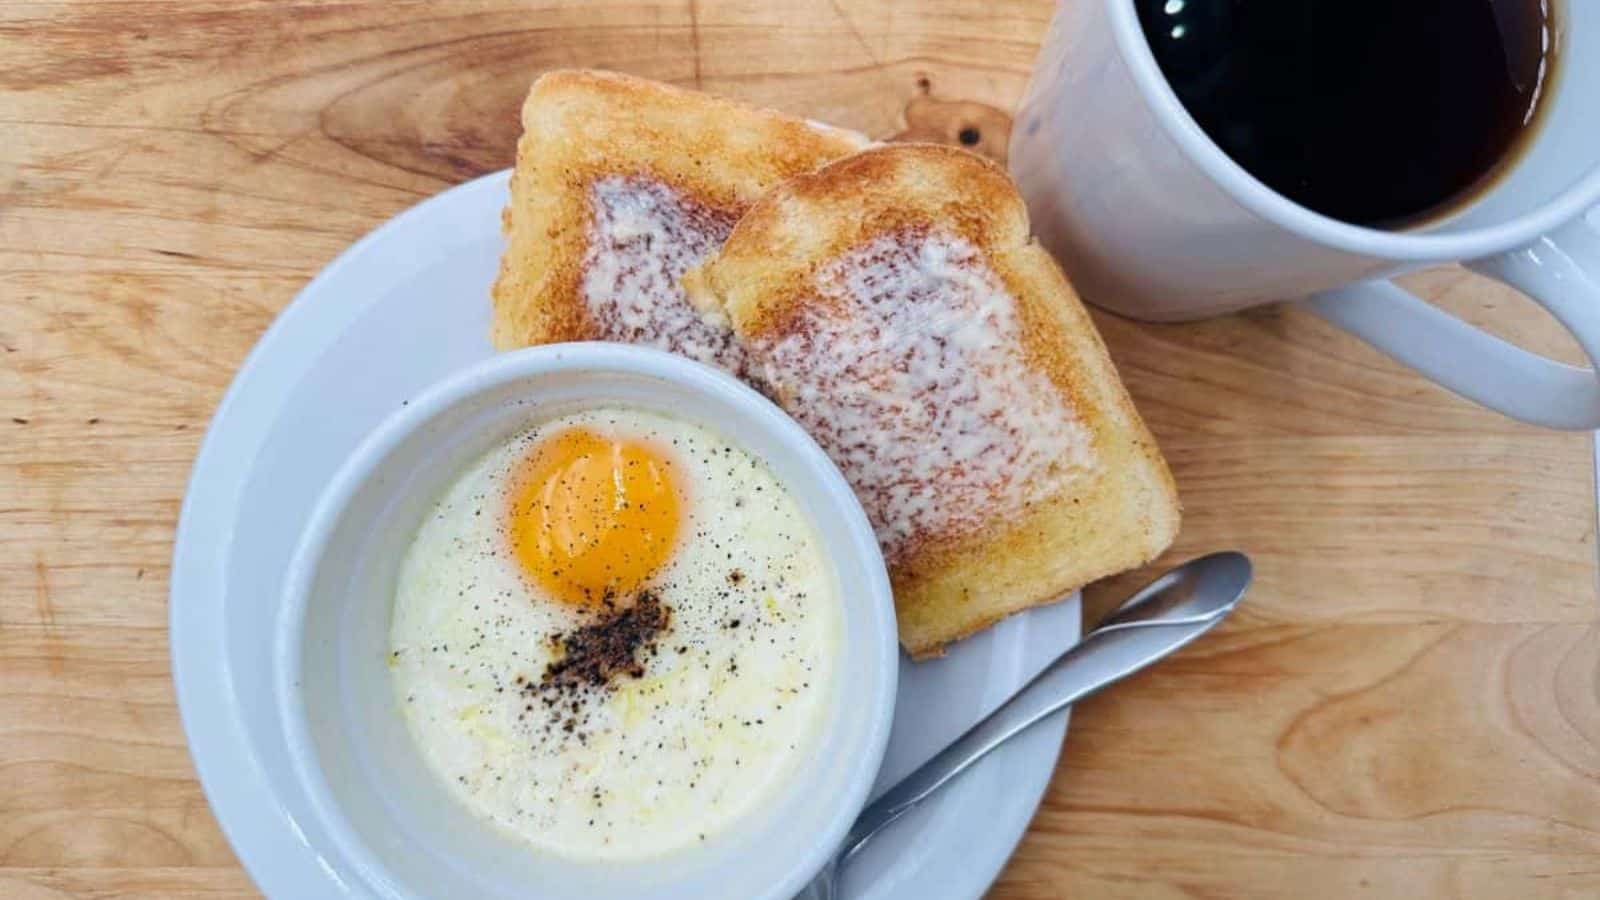 A cup of coffee and an egg on a plate.